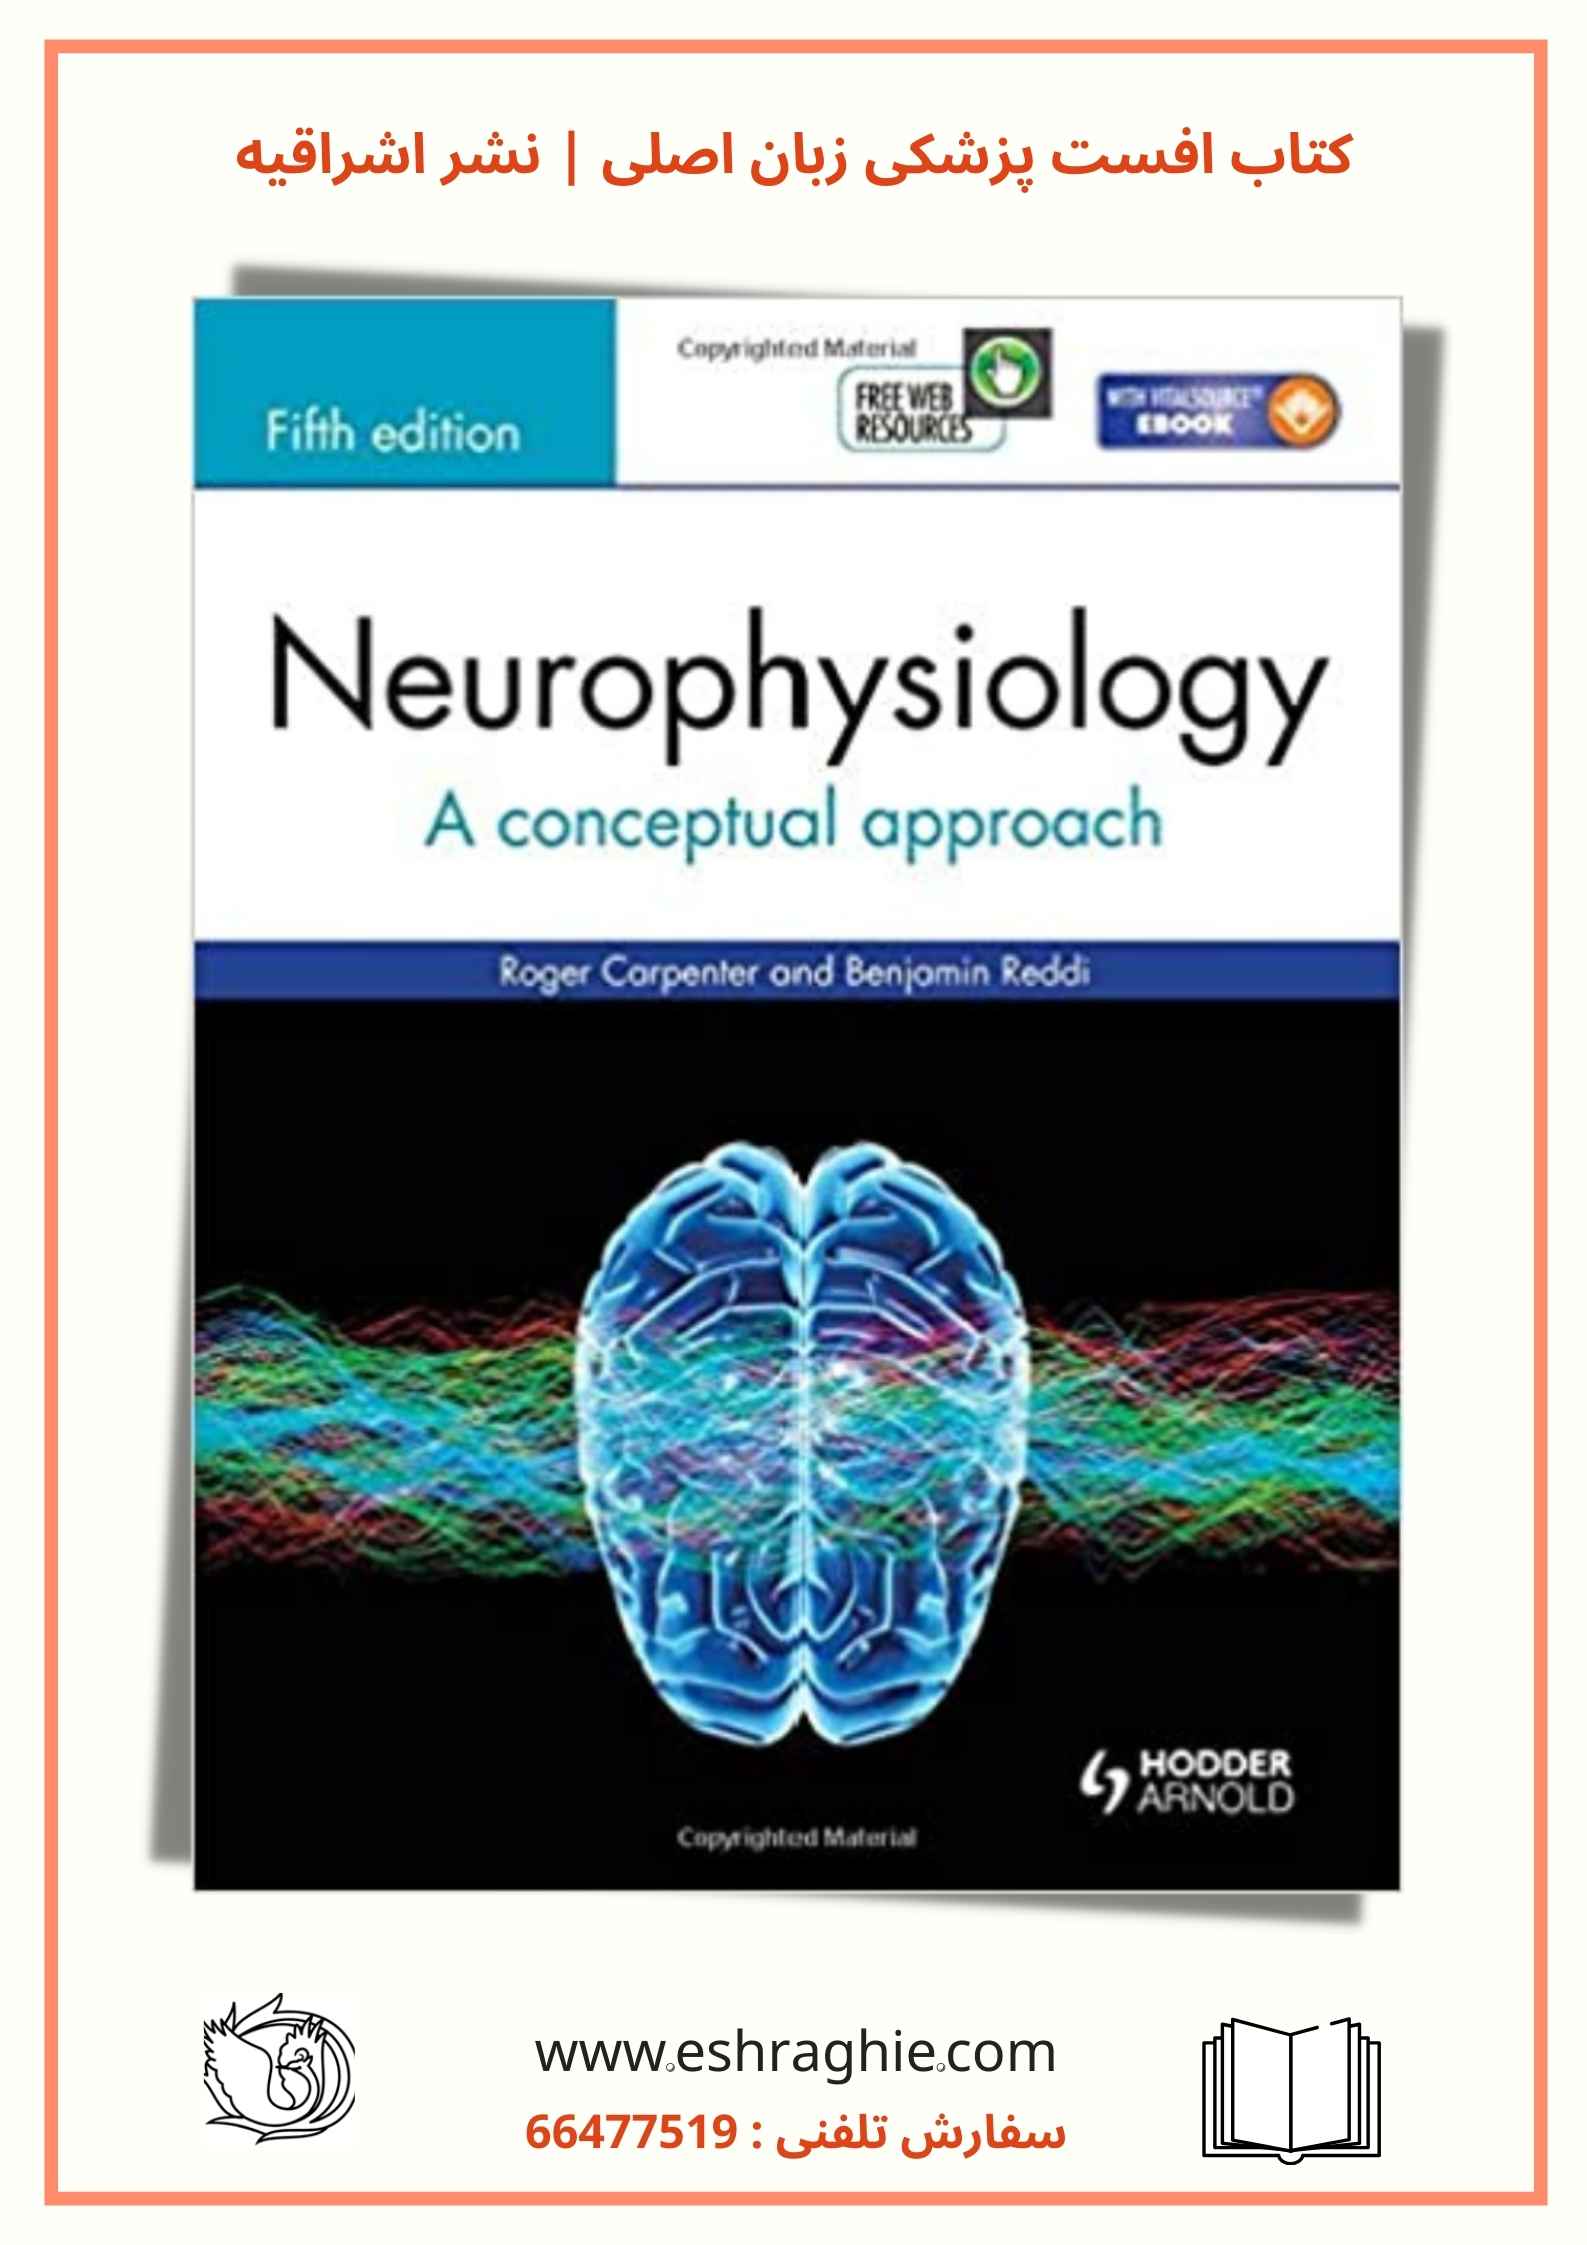 Neurophysiology : A Conceptual Approach | 5th Edition